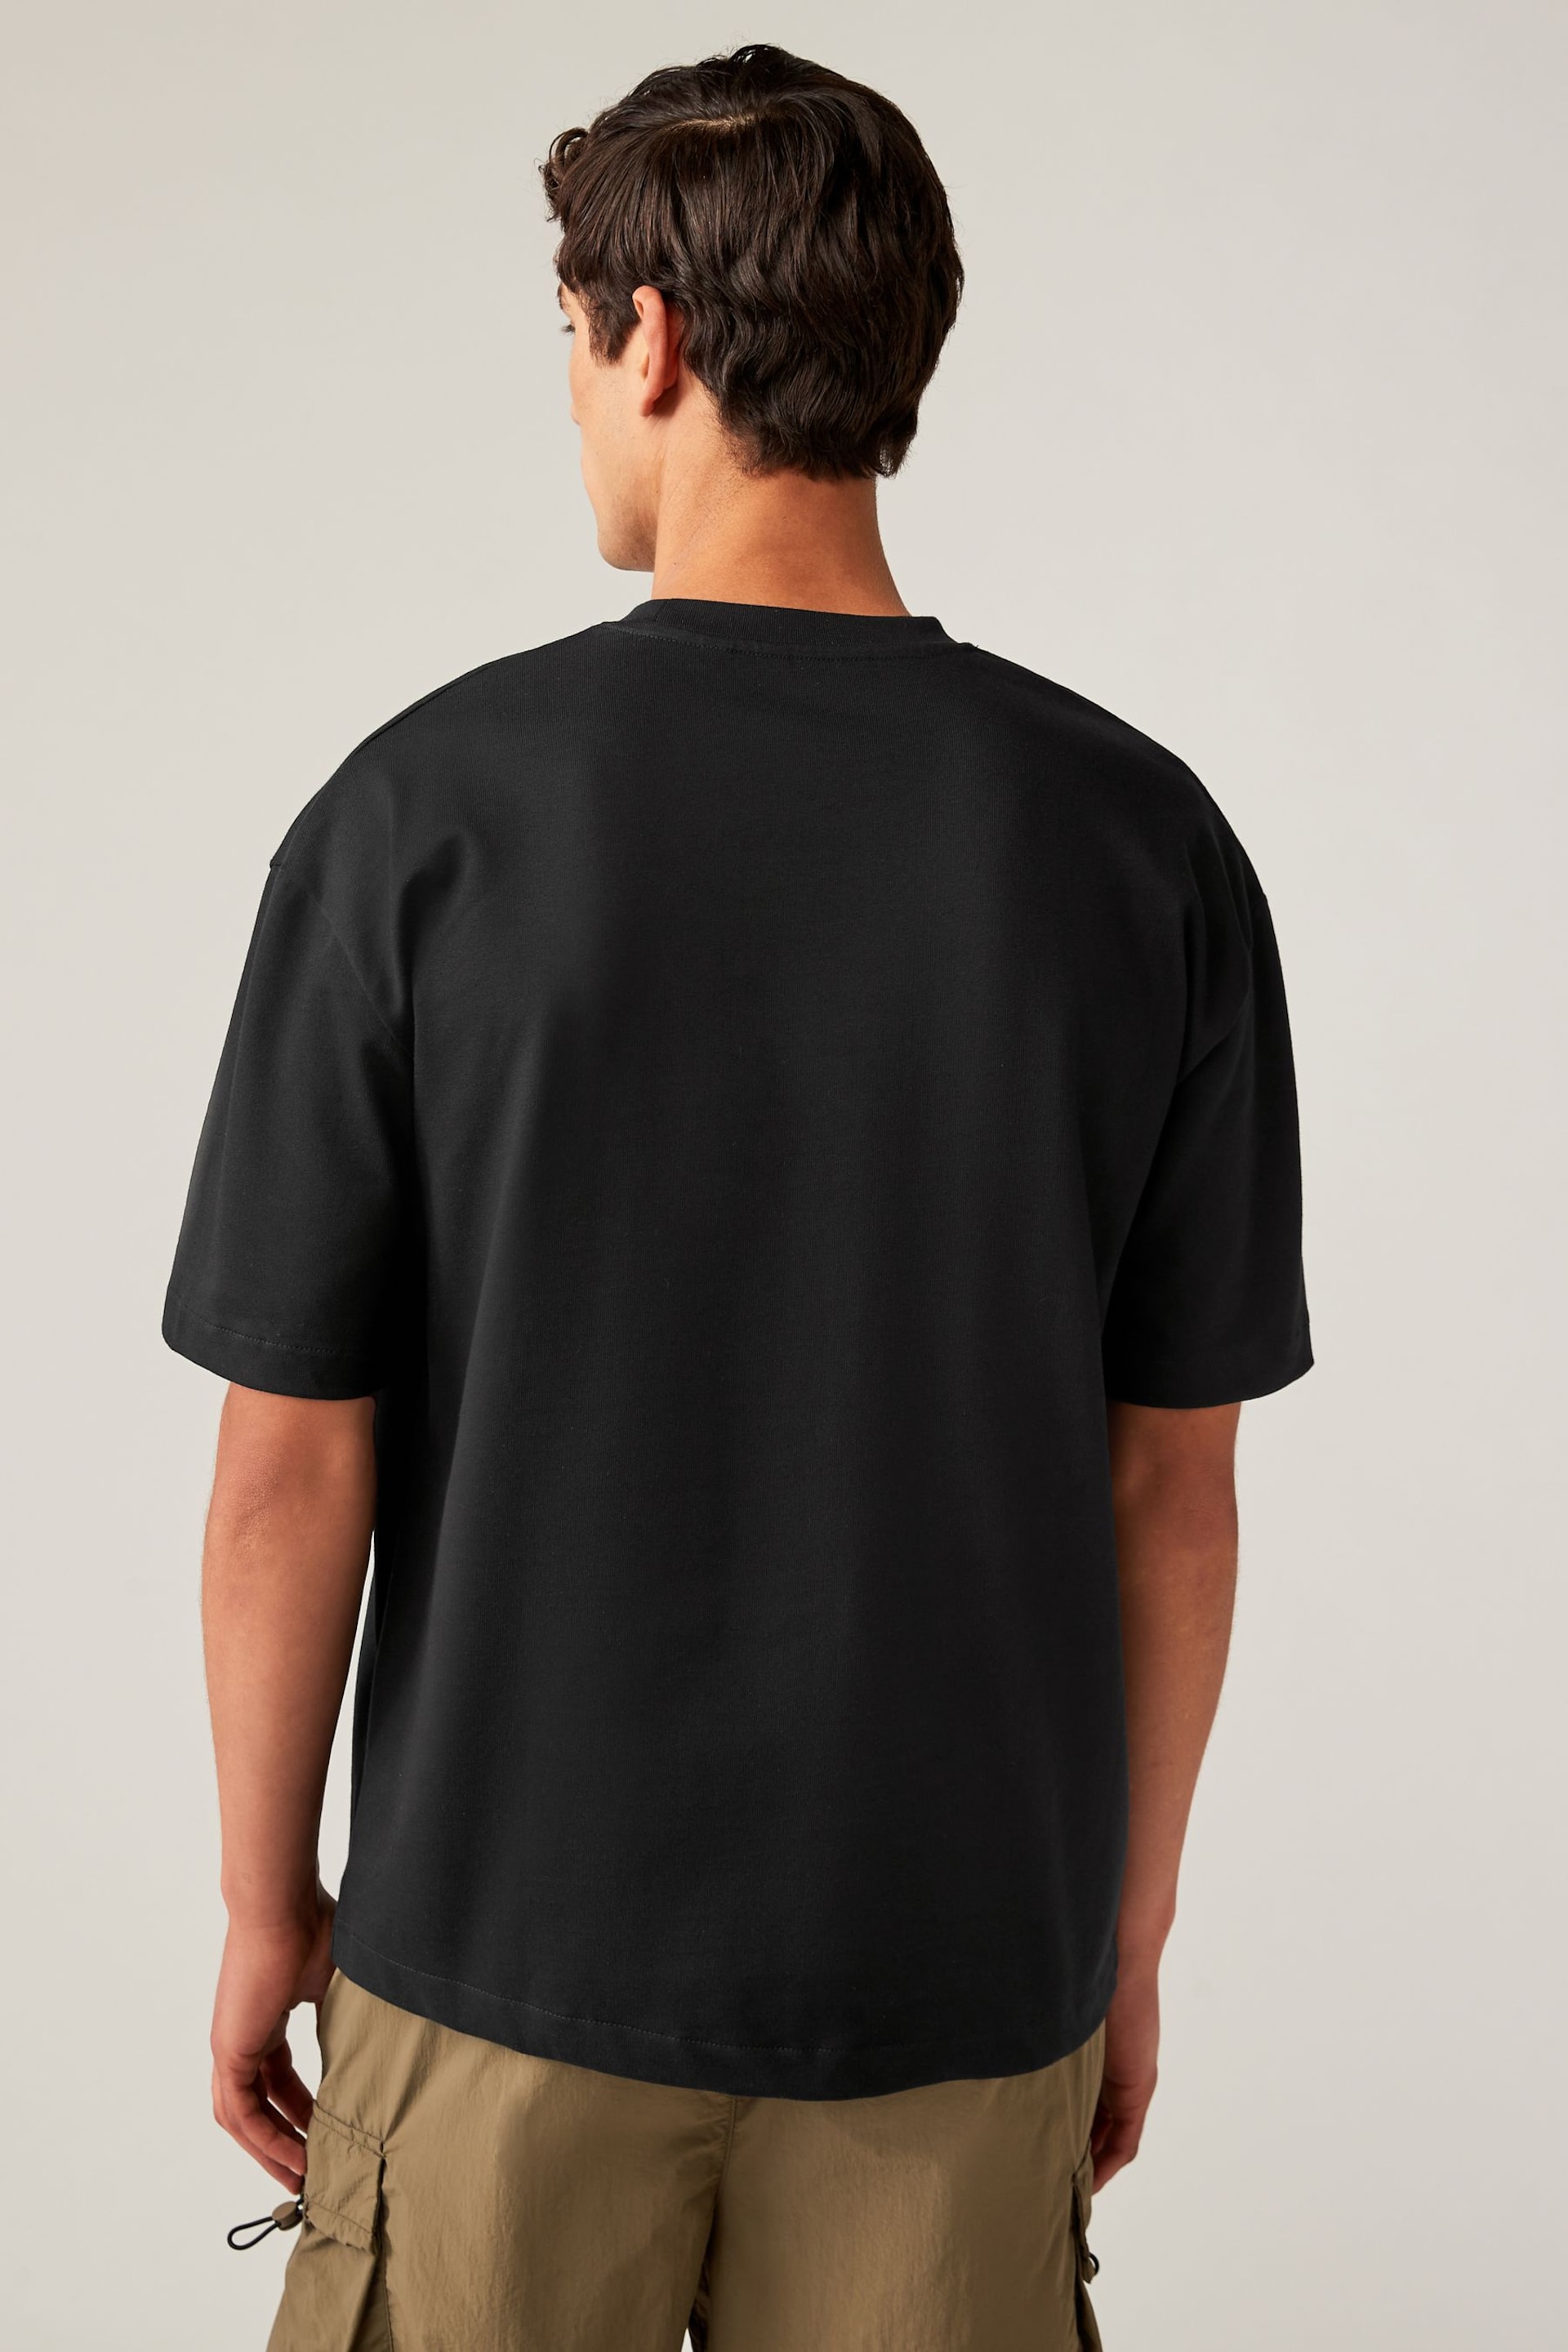 Black Relaxed Fit Heavyweight T-Shirts 3 Pack - Image 4 of 10